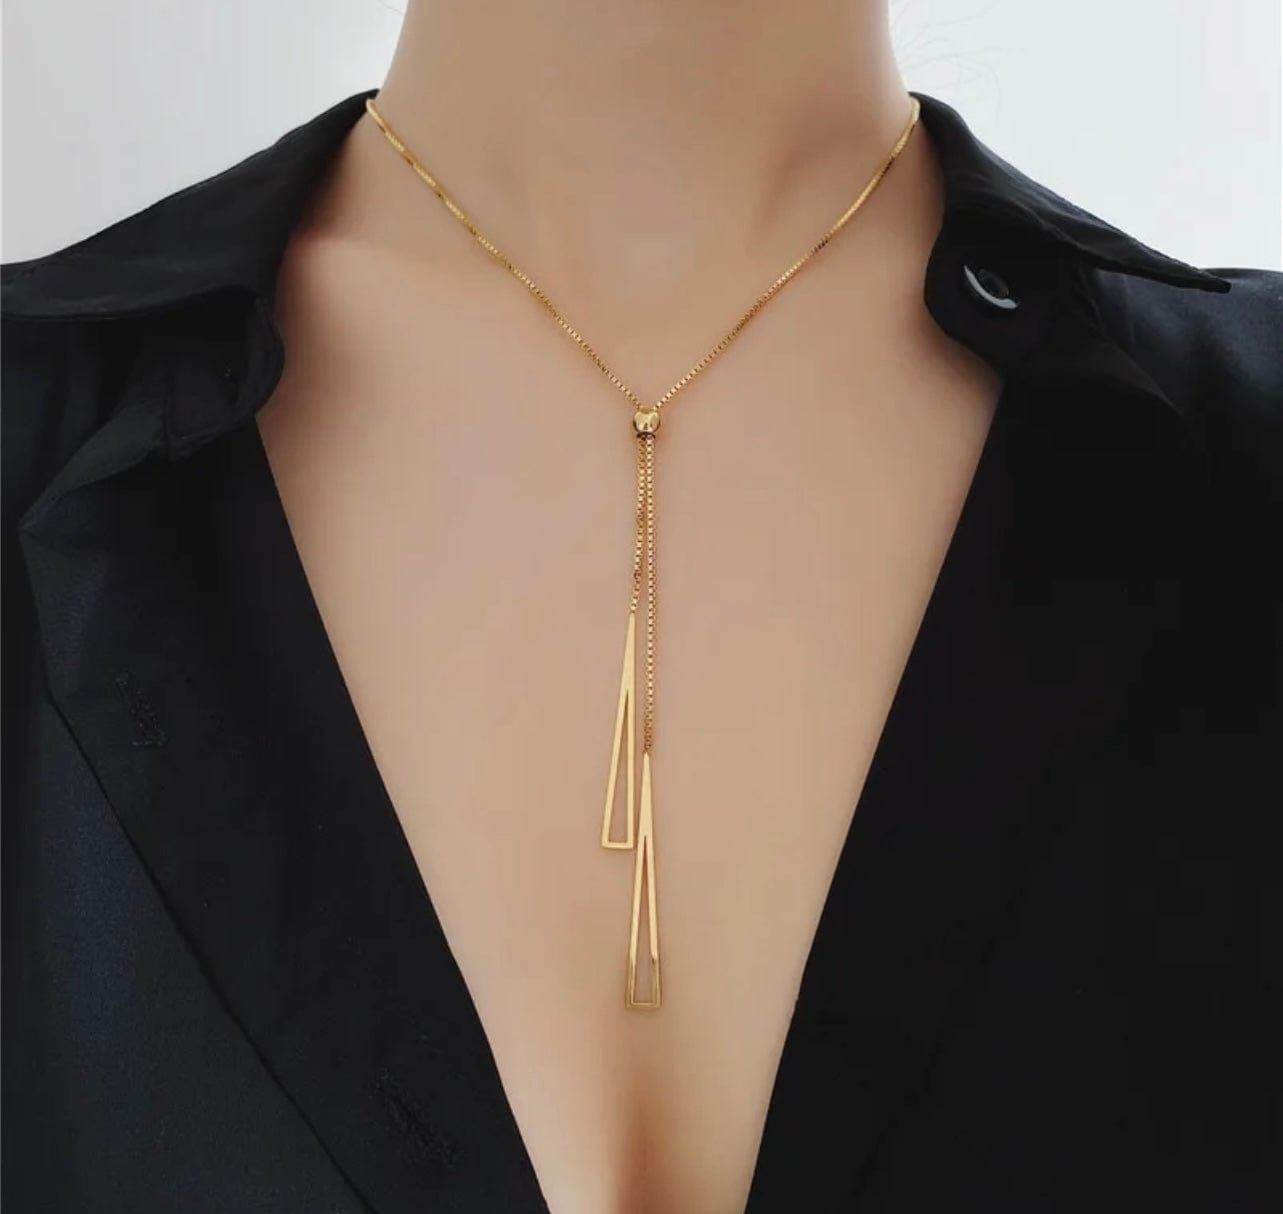 Tassel Pendant Necklace - Maily's Classic Accessories